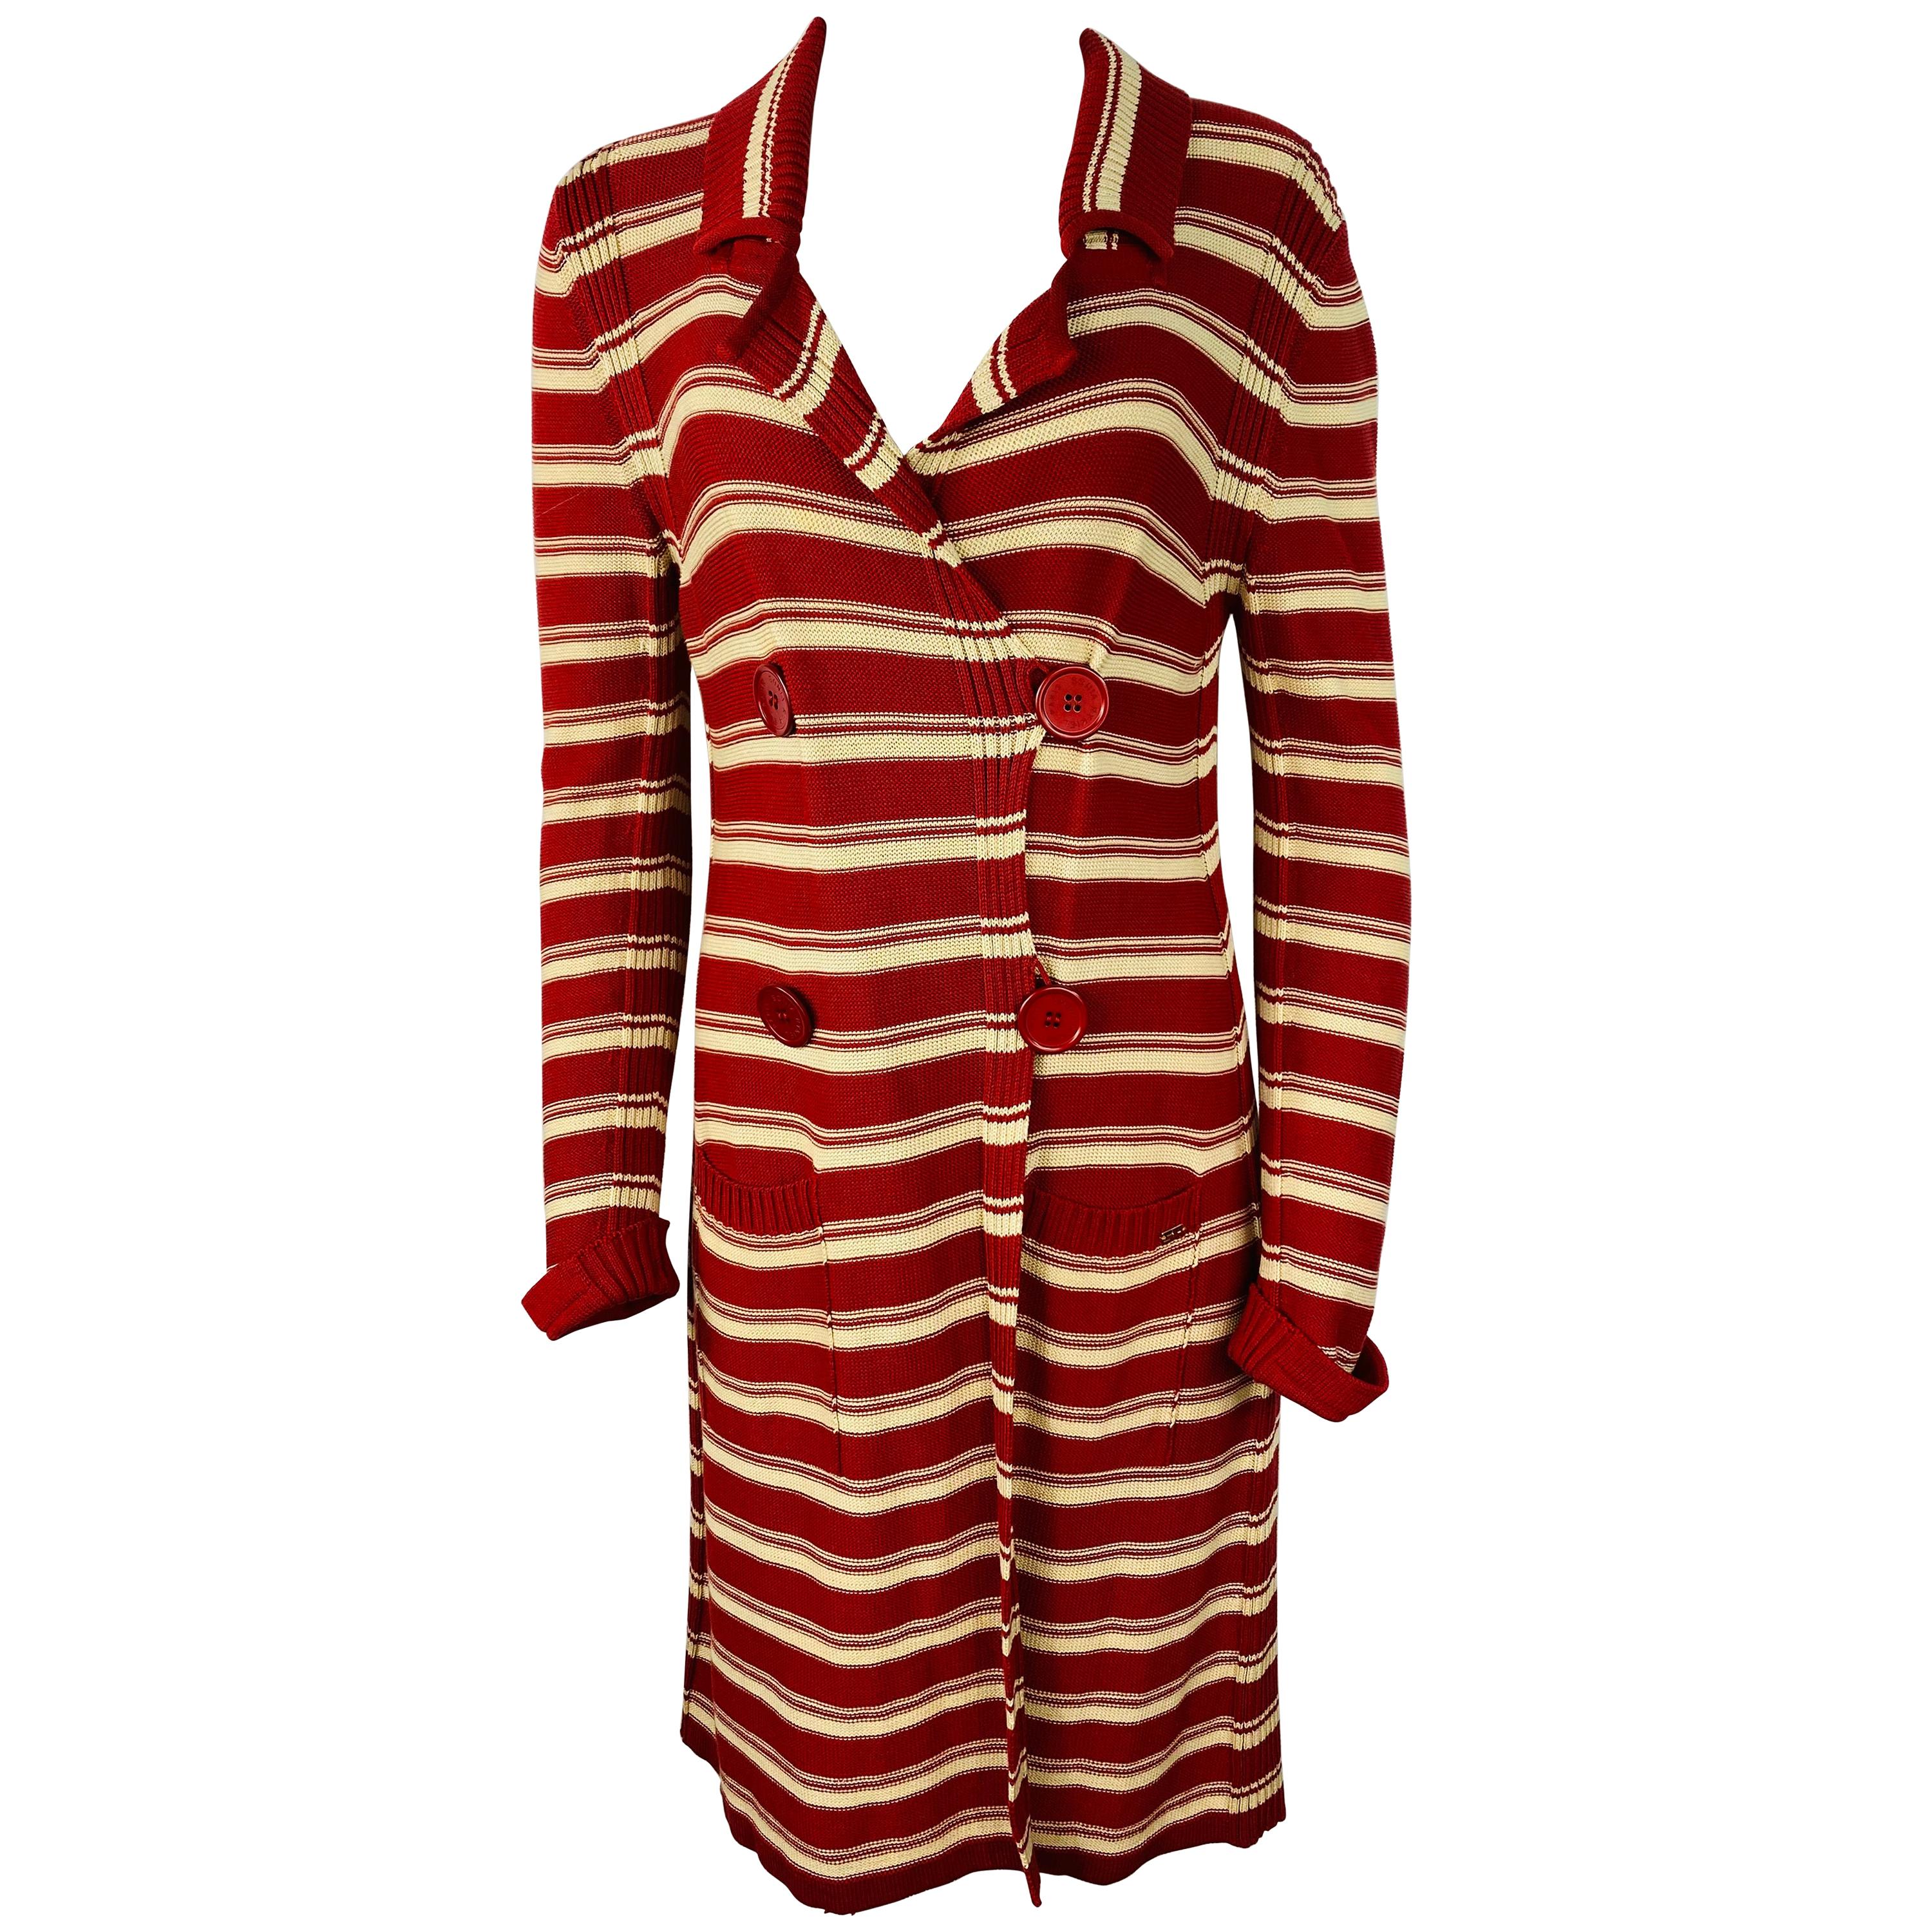 Sonia Rykiel Paris Red and White Knit Cotton Cardigan Sweater, Size 42 For Sale